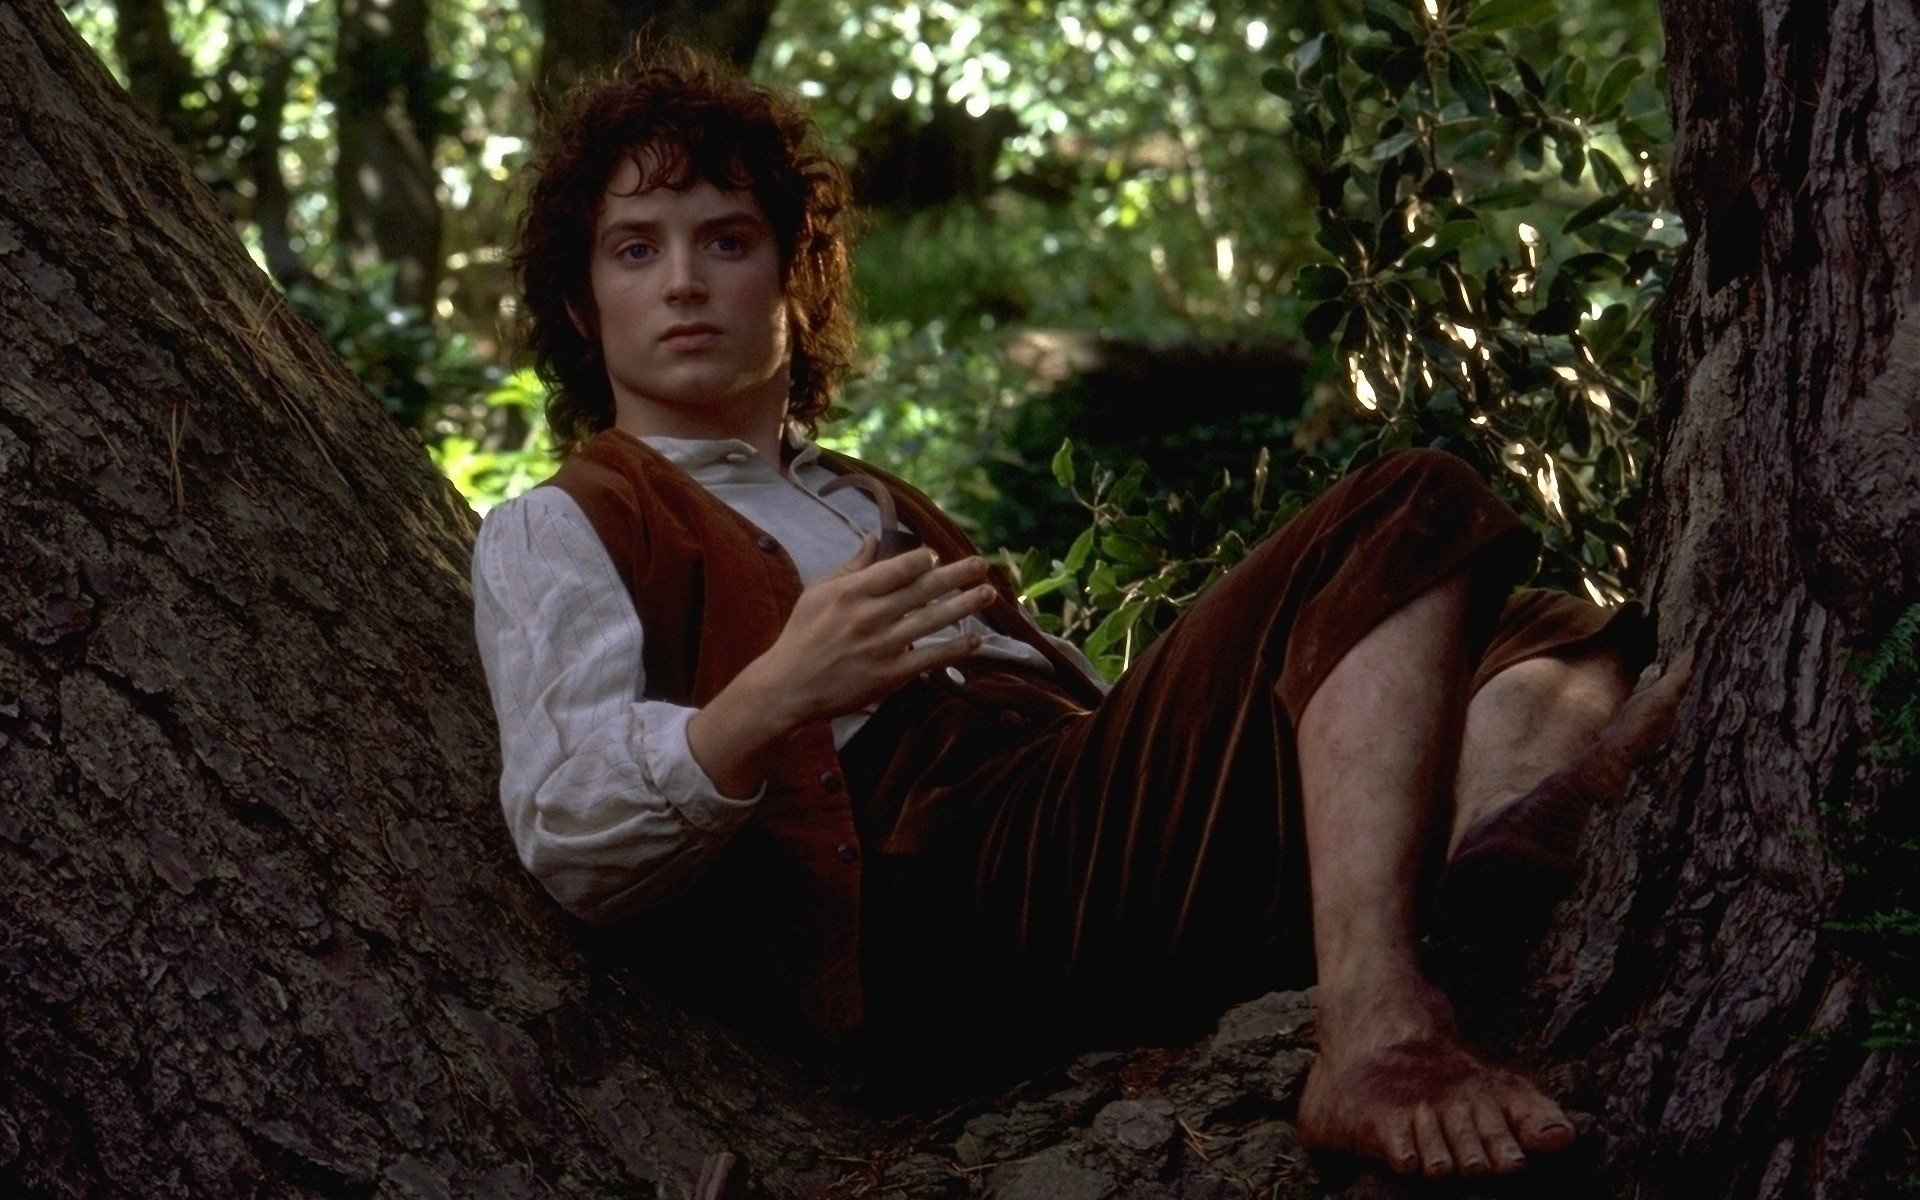 Frodo Baggins, Elijah Wood, Middle-earth adventure, The Fellowship of the Ring, 1920x1200 HD Desktop